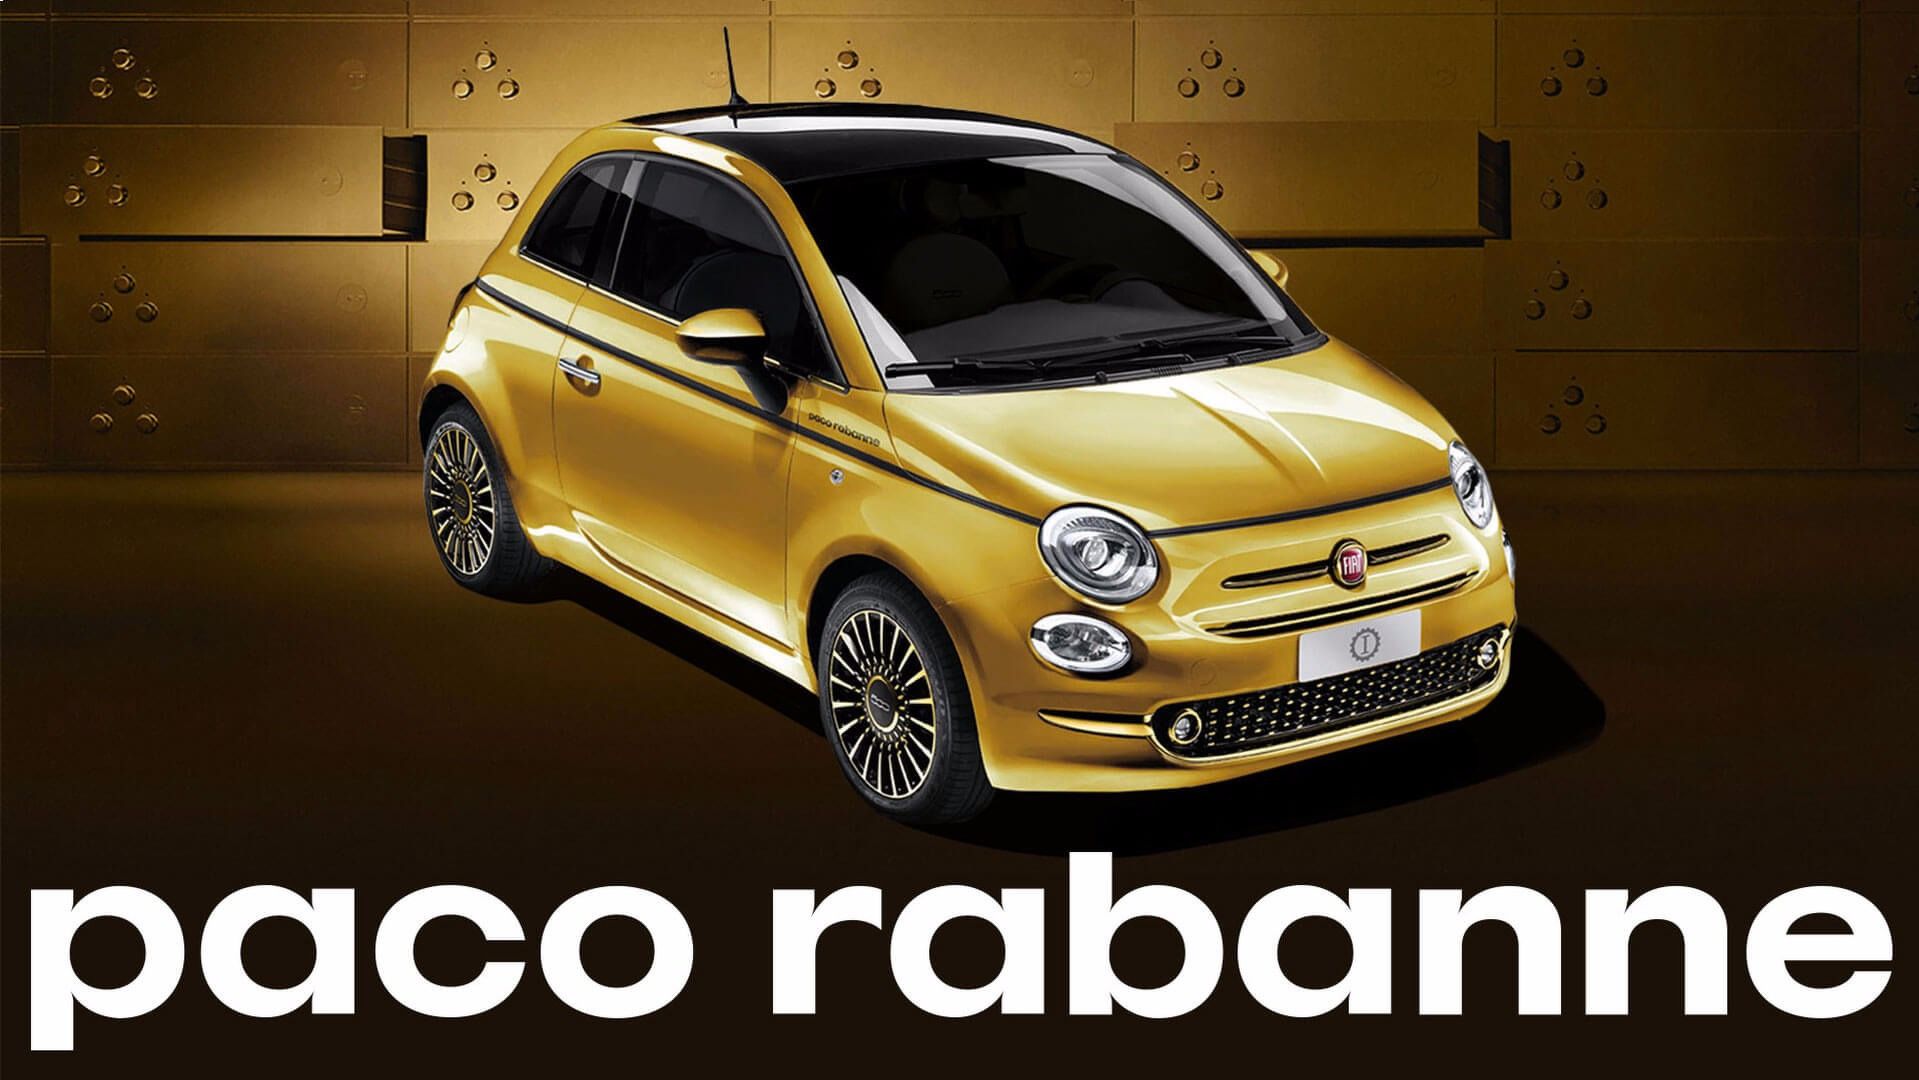 Fiat 500: The history of an icon - Blog Record Go